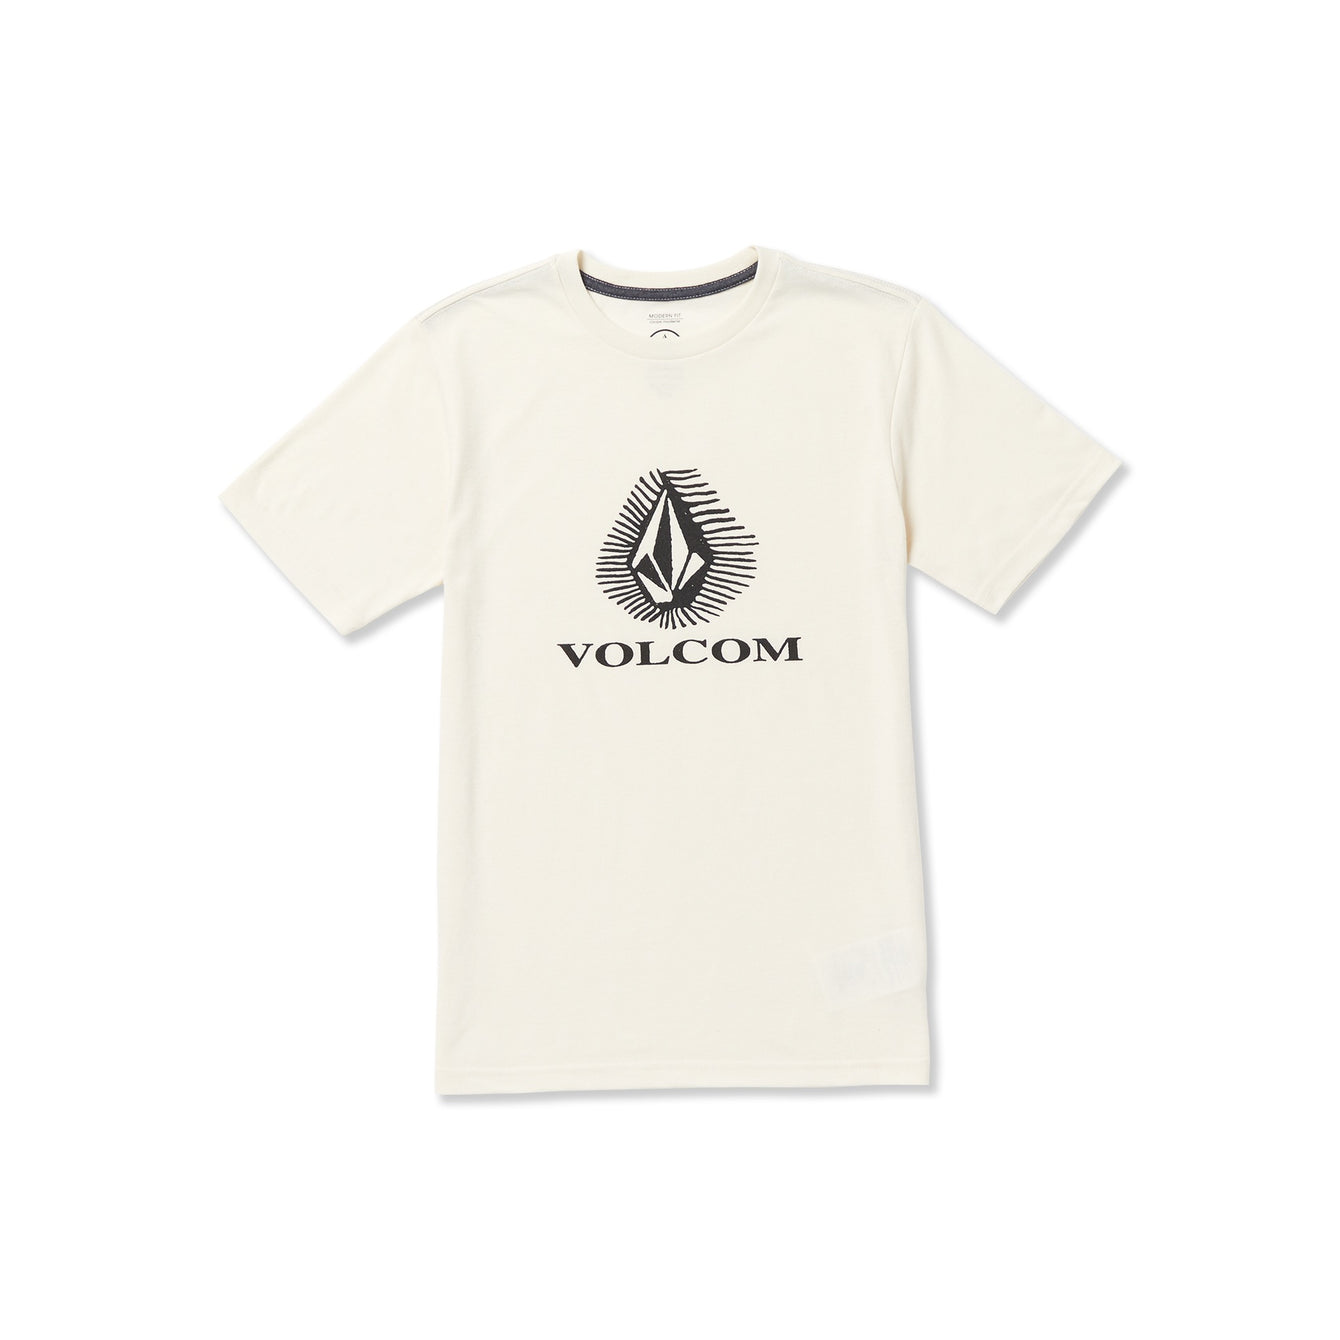 OFFSHORE STONE SST - OFF WHITE HEATHER